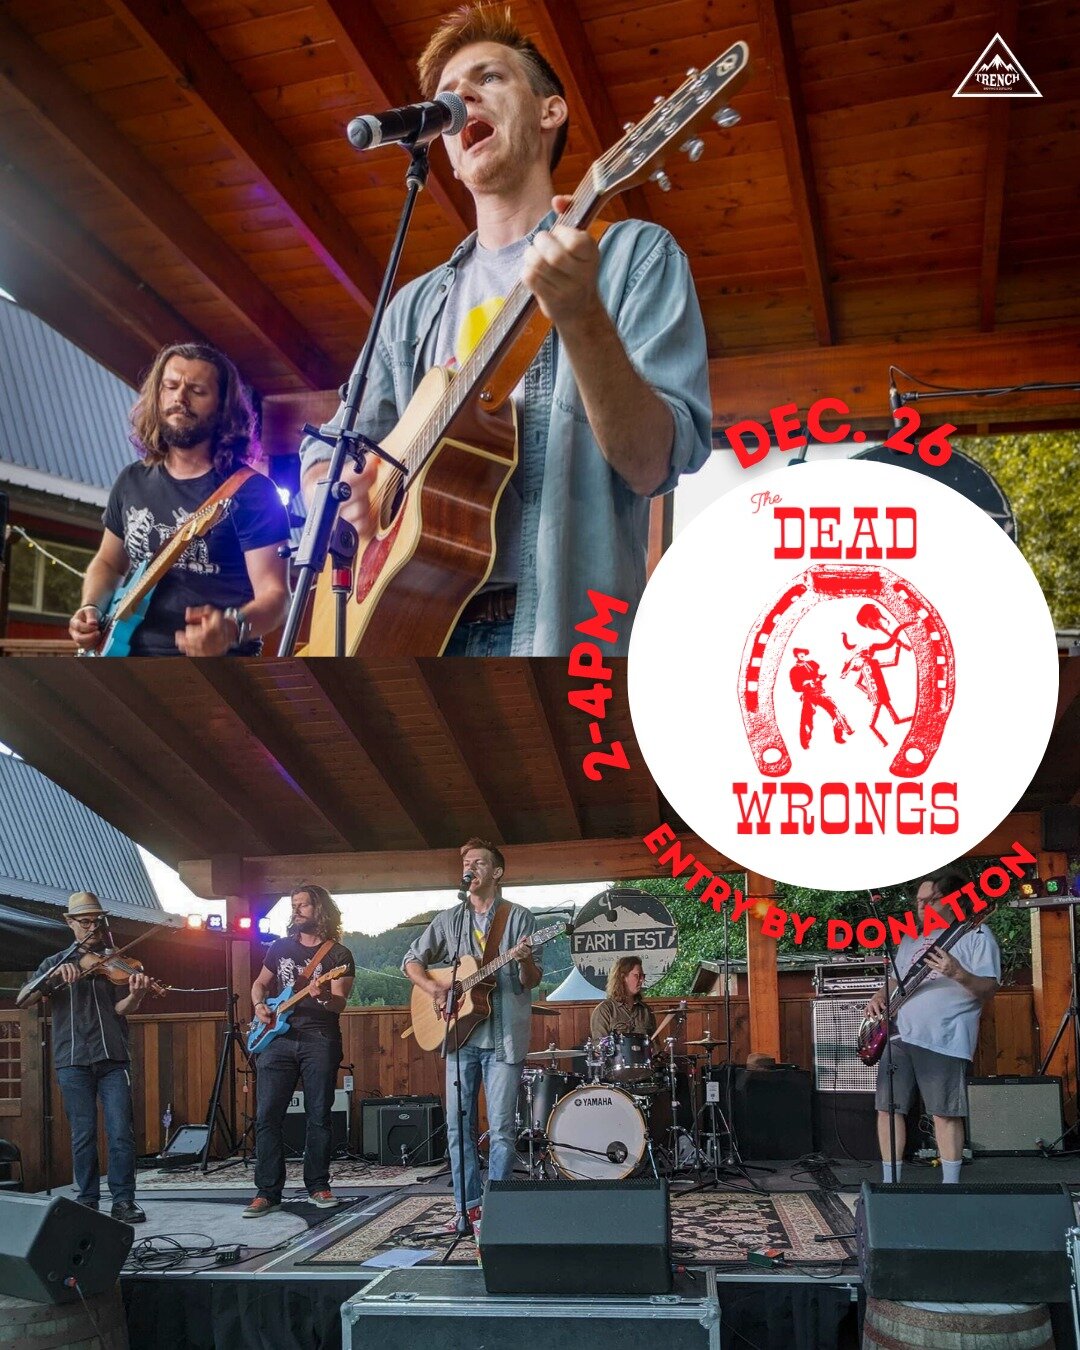 We have live music with The Dead Wrongs and Genevieve Jaide on Dec. 6th!

The Dead Wrongs are a group of local misfits resurrecting the spirit of honky tonk through country standards, outlaw ballads, and all-original Northern cowboy tunes.

No cover,